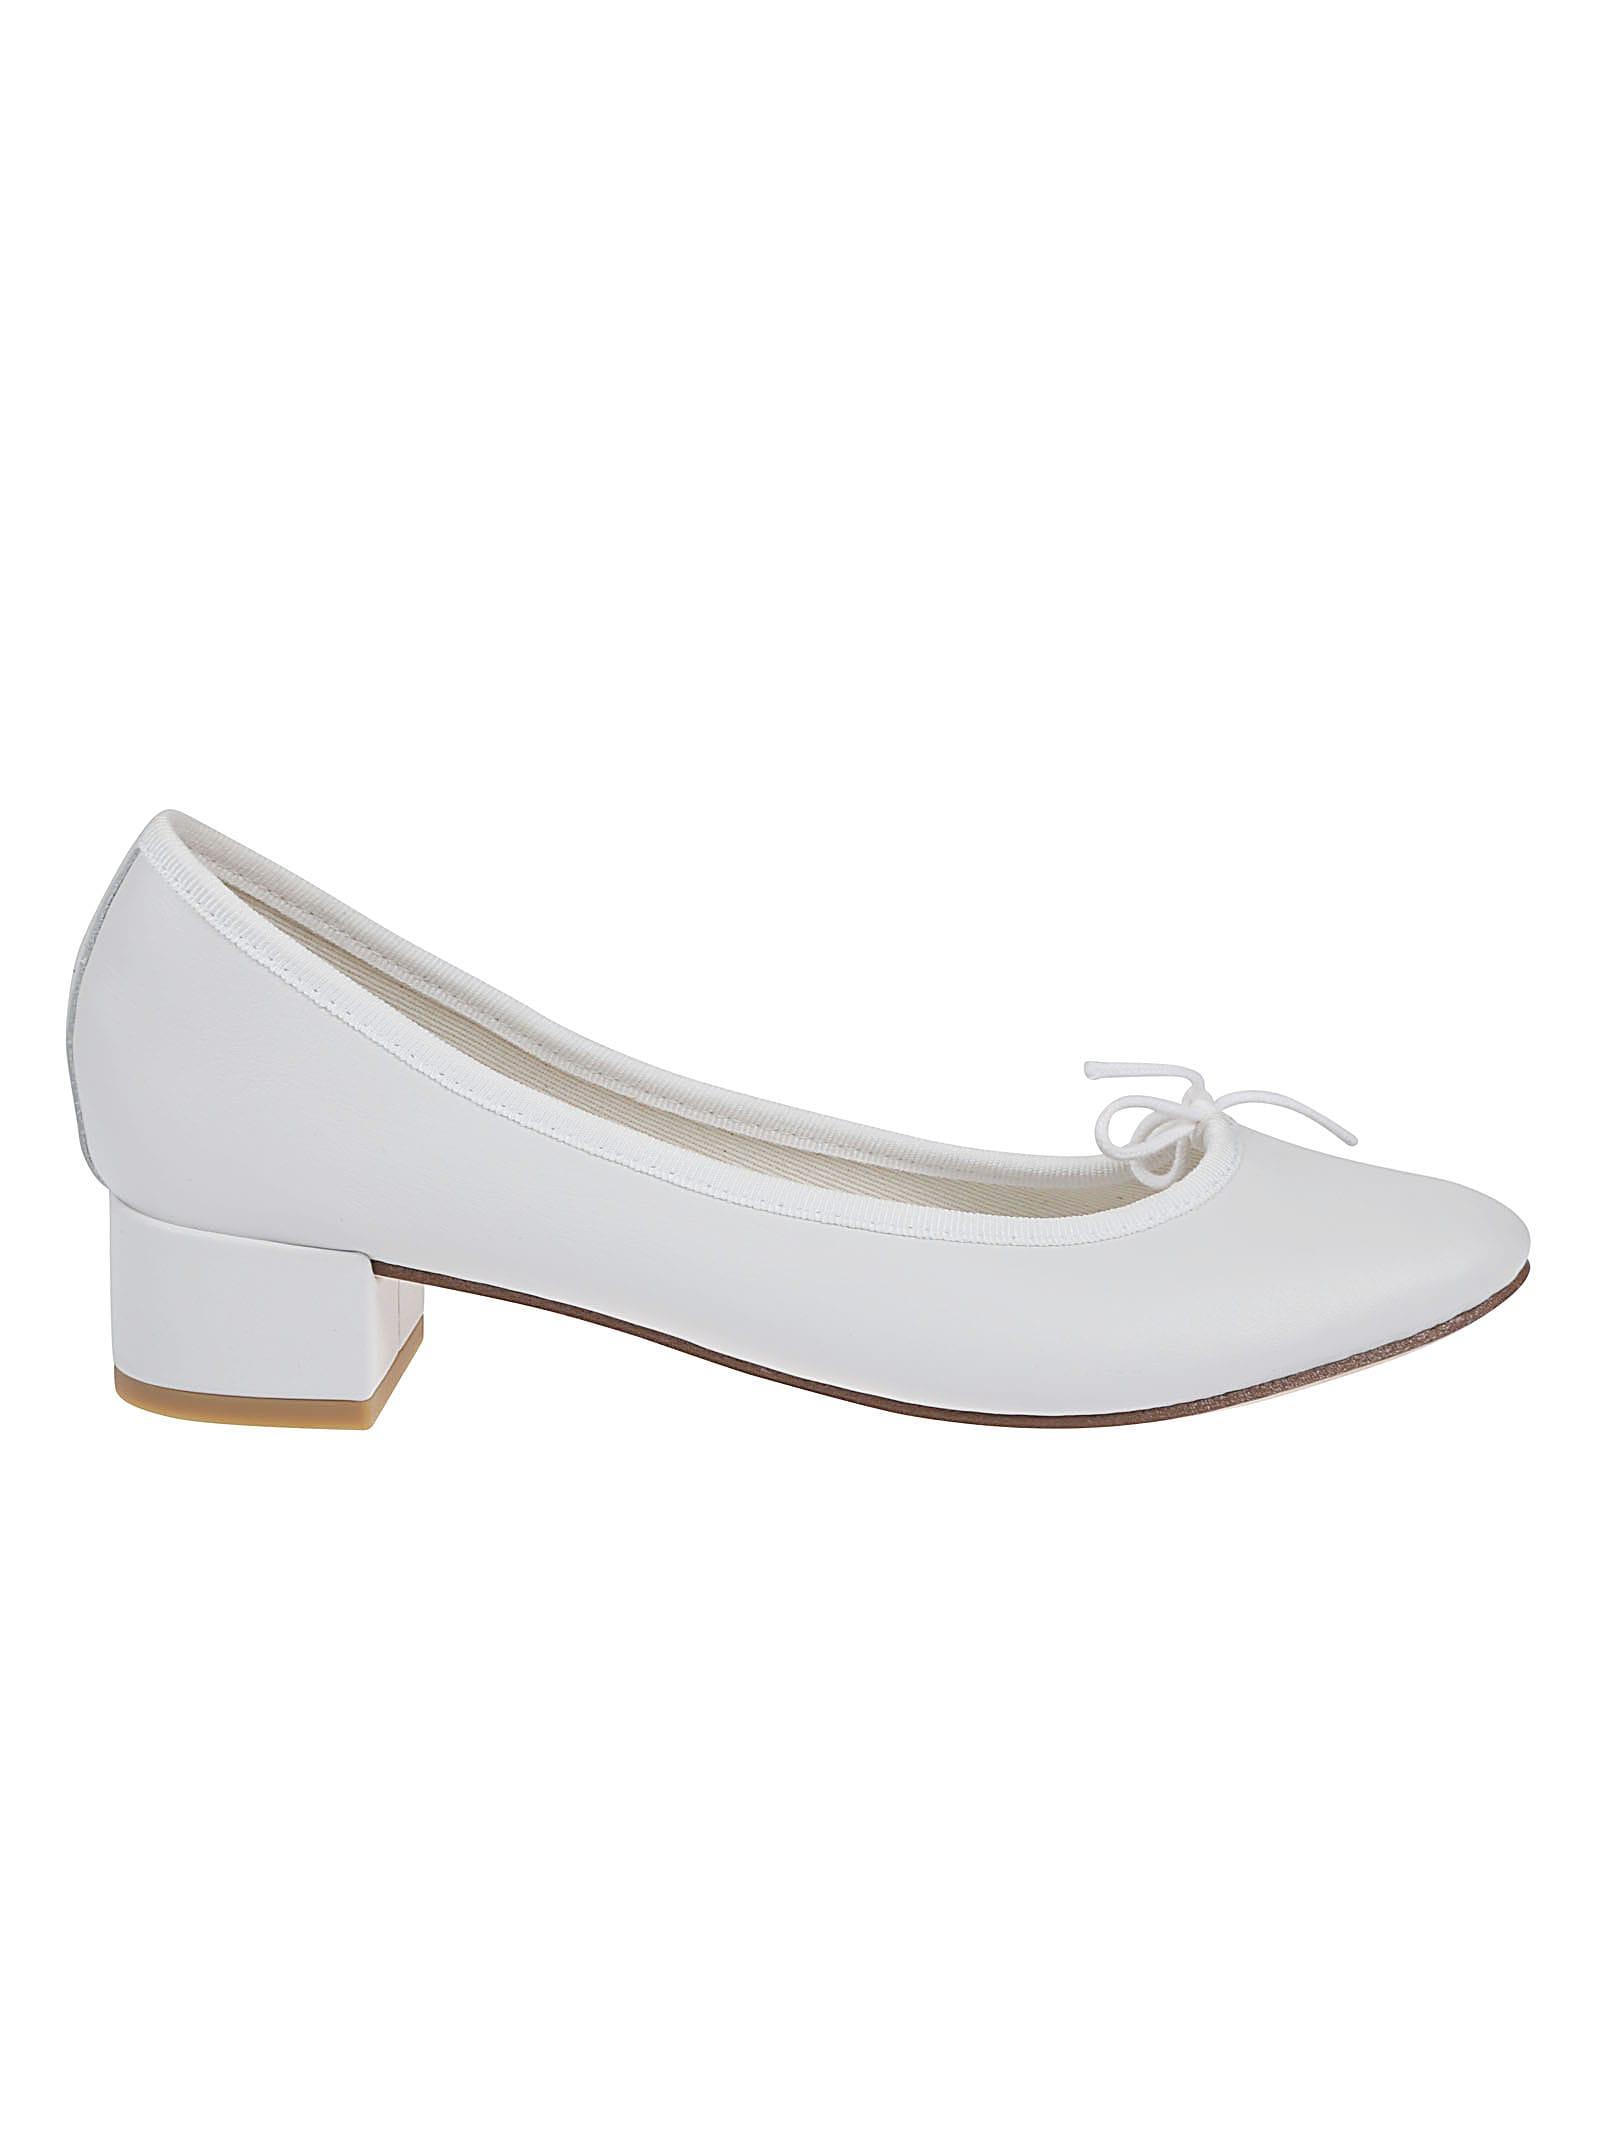 Repetto Camille Mythique Pumps in White | Lyst